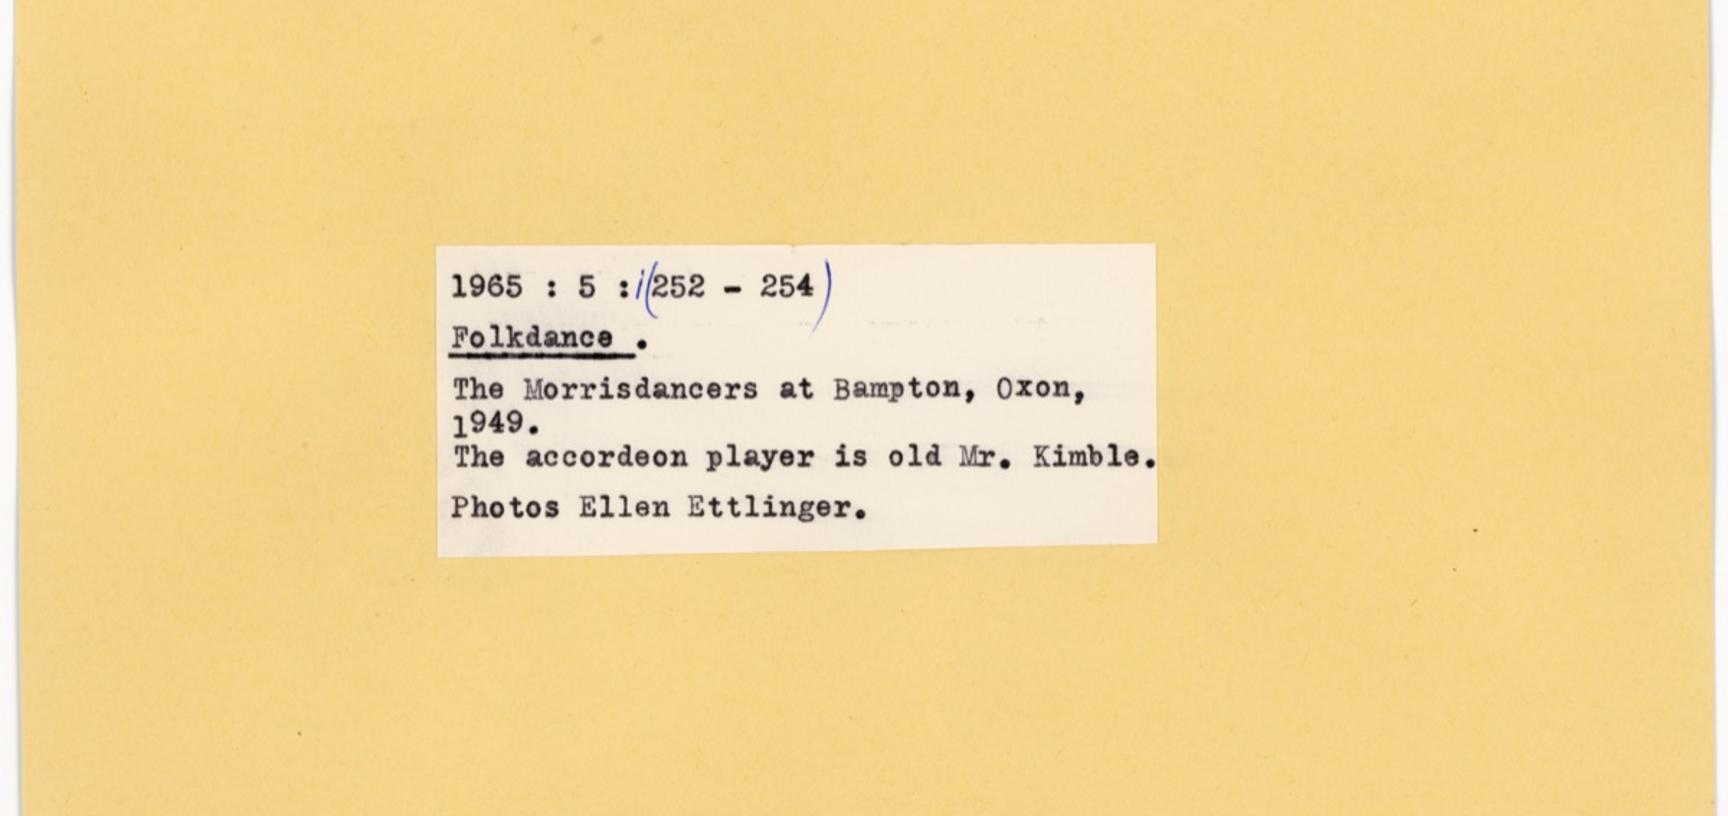 Reverse of the previous index card with typed label for notes and attribution: Folkdance. The Morrisdancers at Bampton, Oxon, 1949. The accordeon player is old Mr. Kimble. Photos Ellen Ettlinger